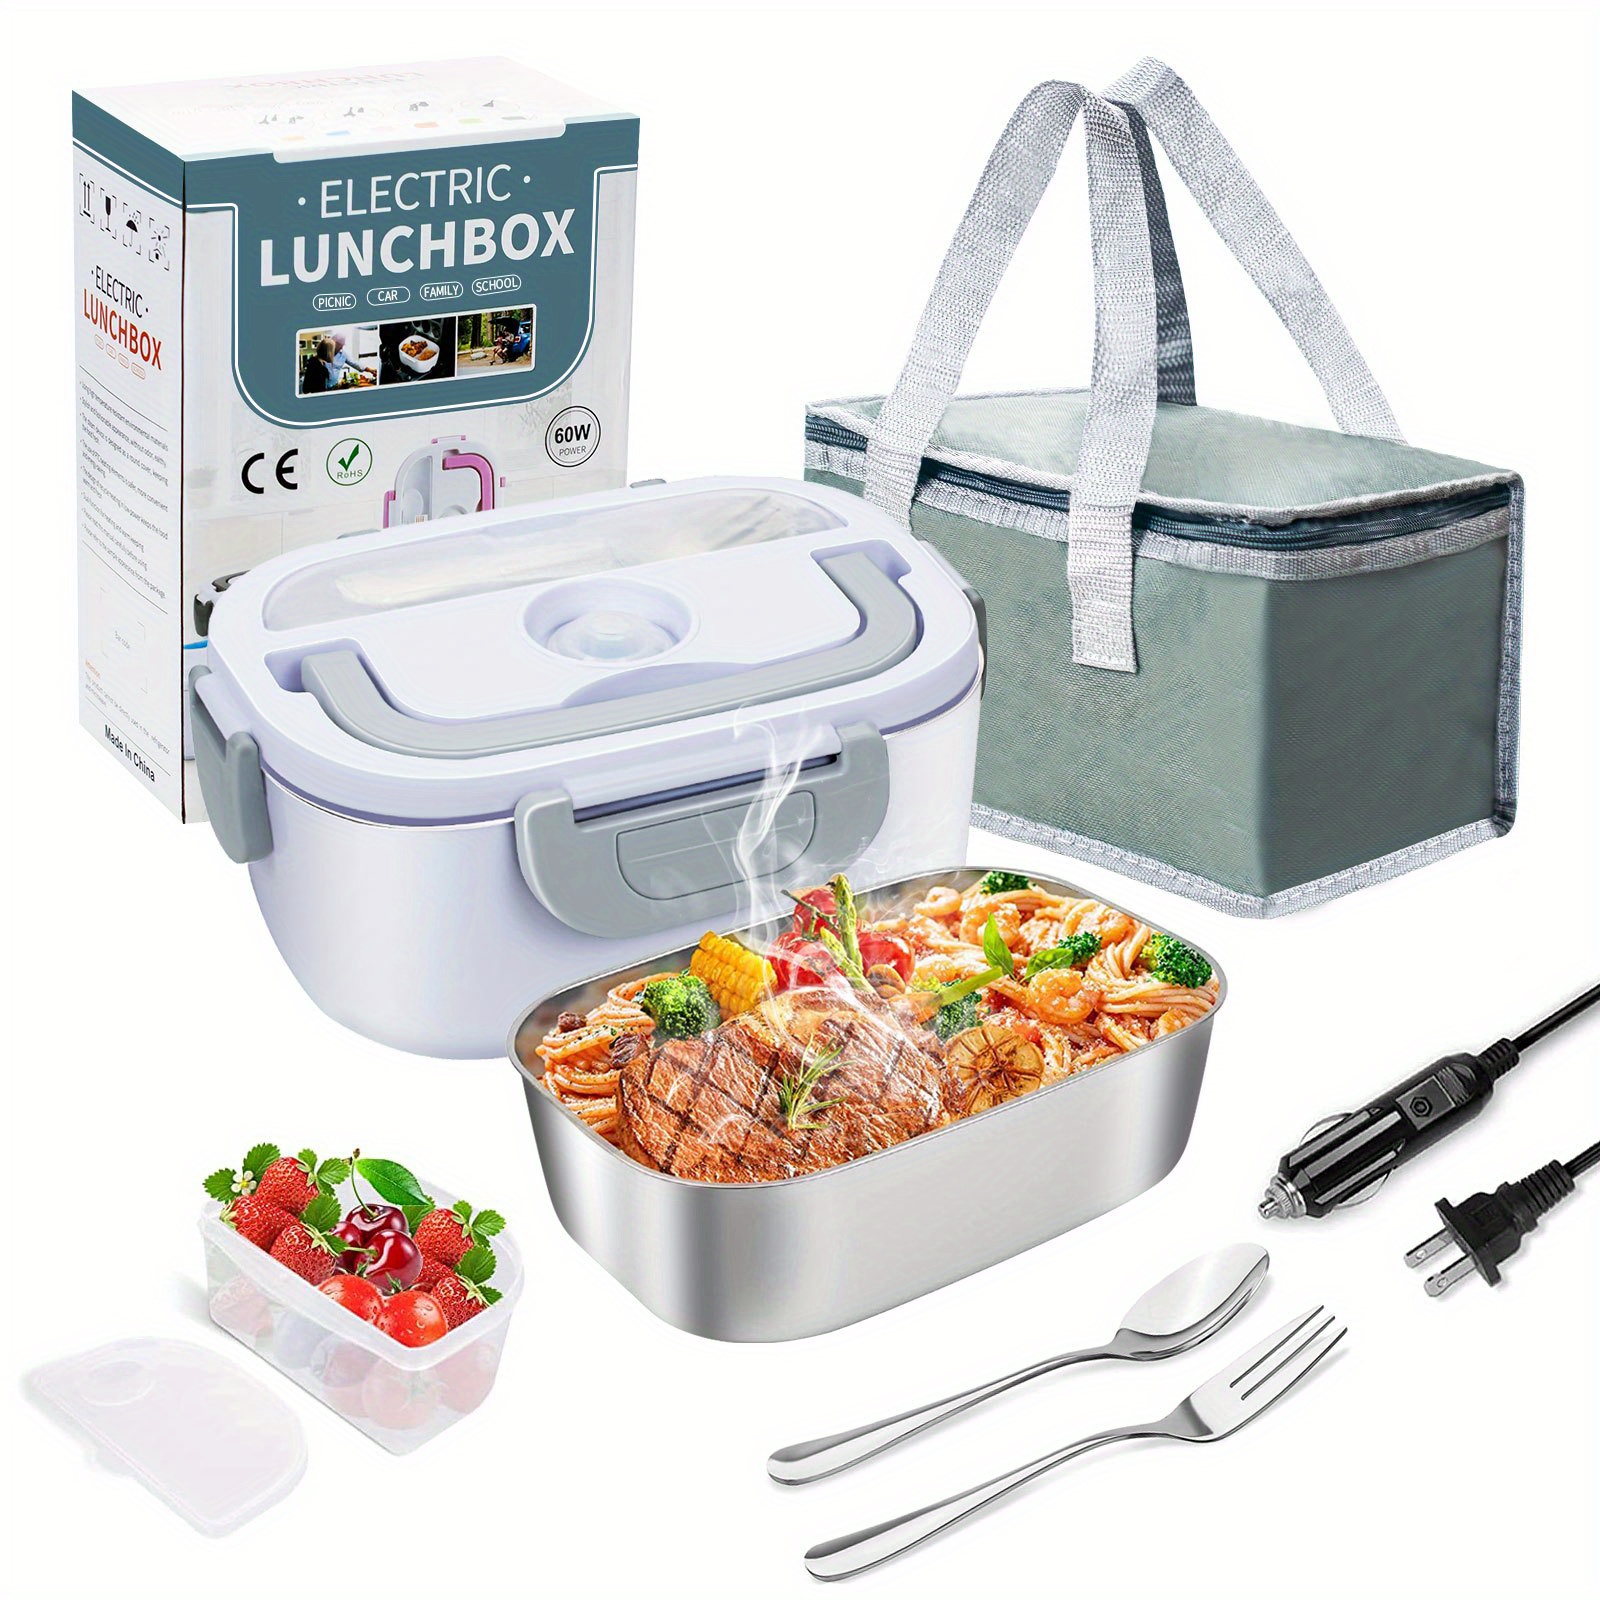 1.5L Removable Electric Lunch Box Food Heater, Portable Food Warmer Self Heating  Lunch Box –Leak Proof, Fork & Spoon & Carry Bag